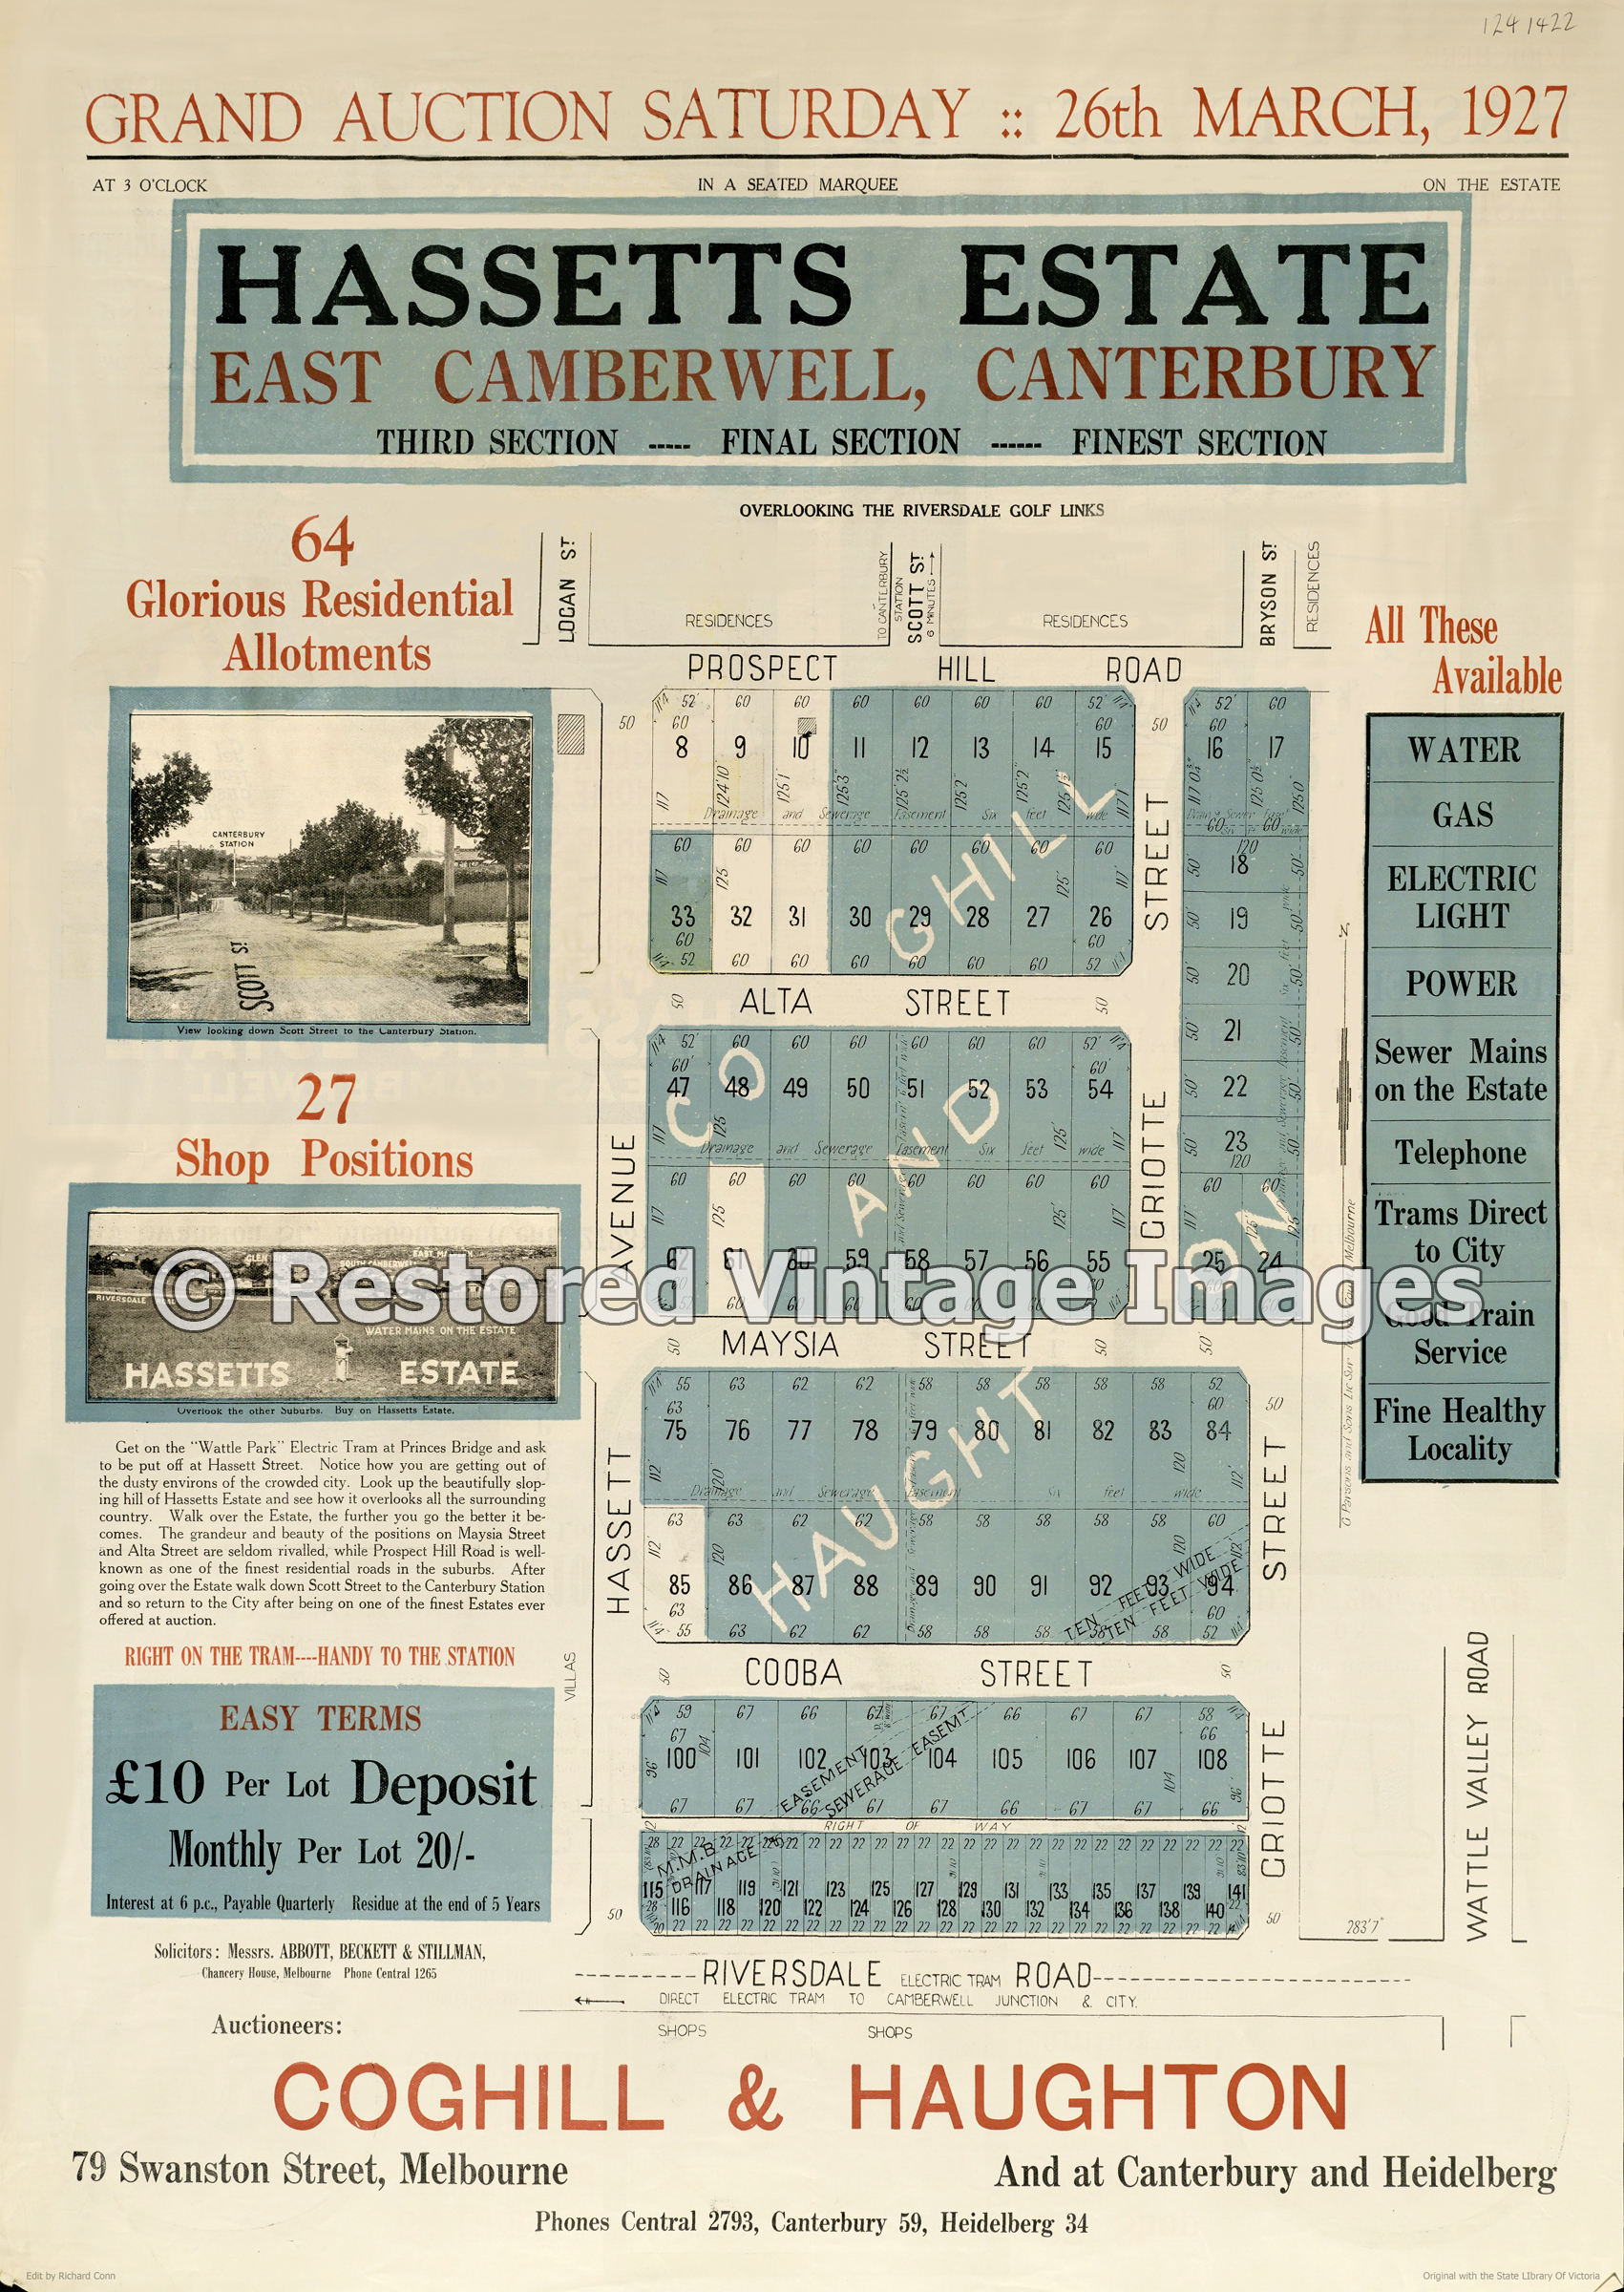 Hassetts Estate 26th March 1927 – Camberwell